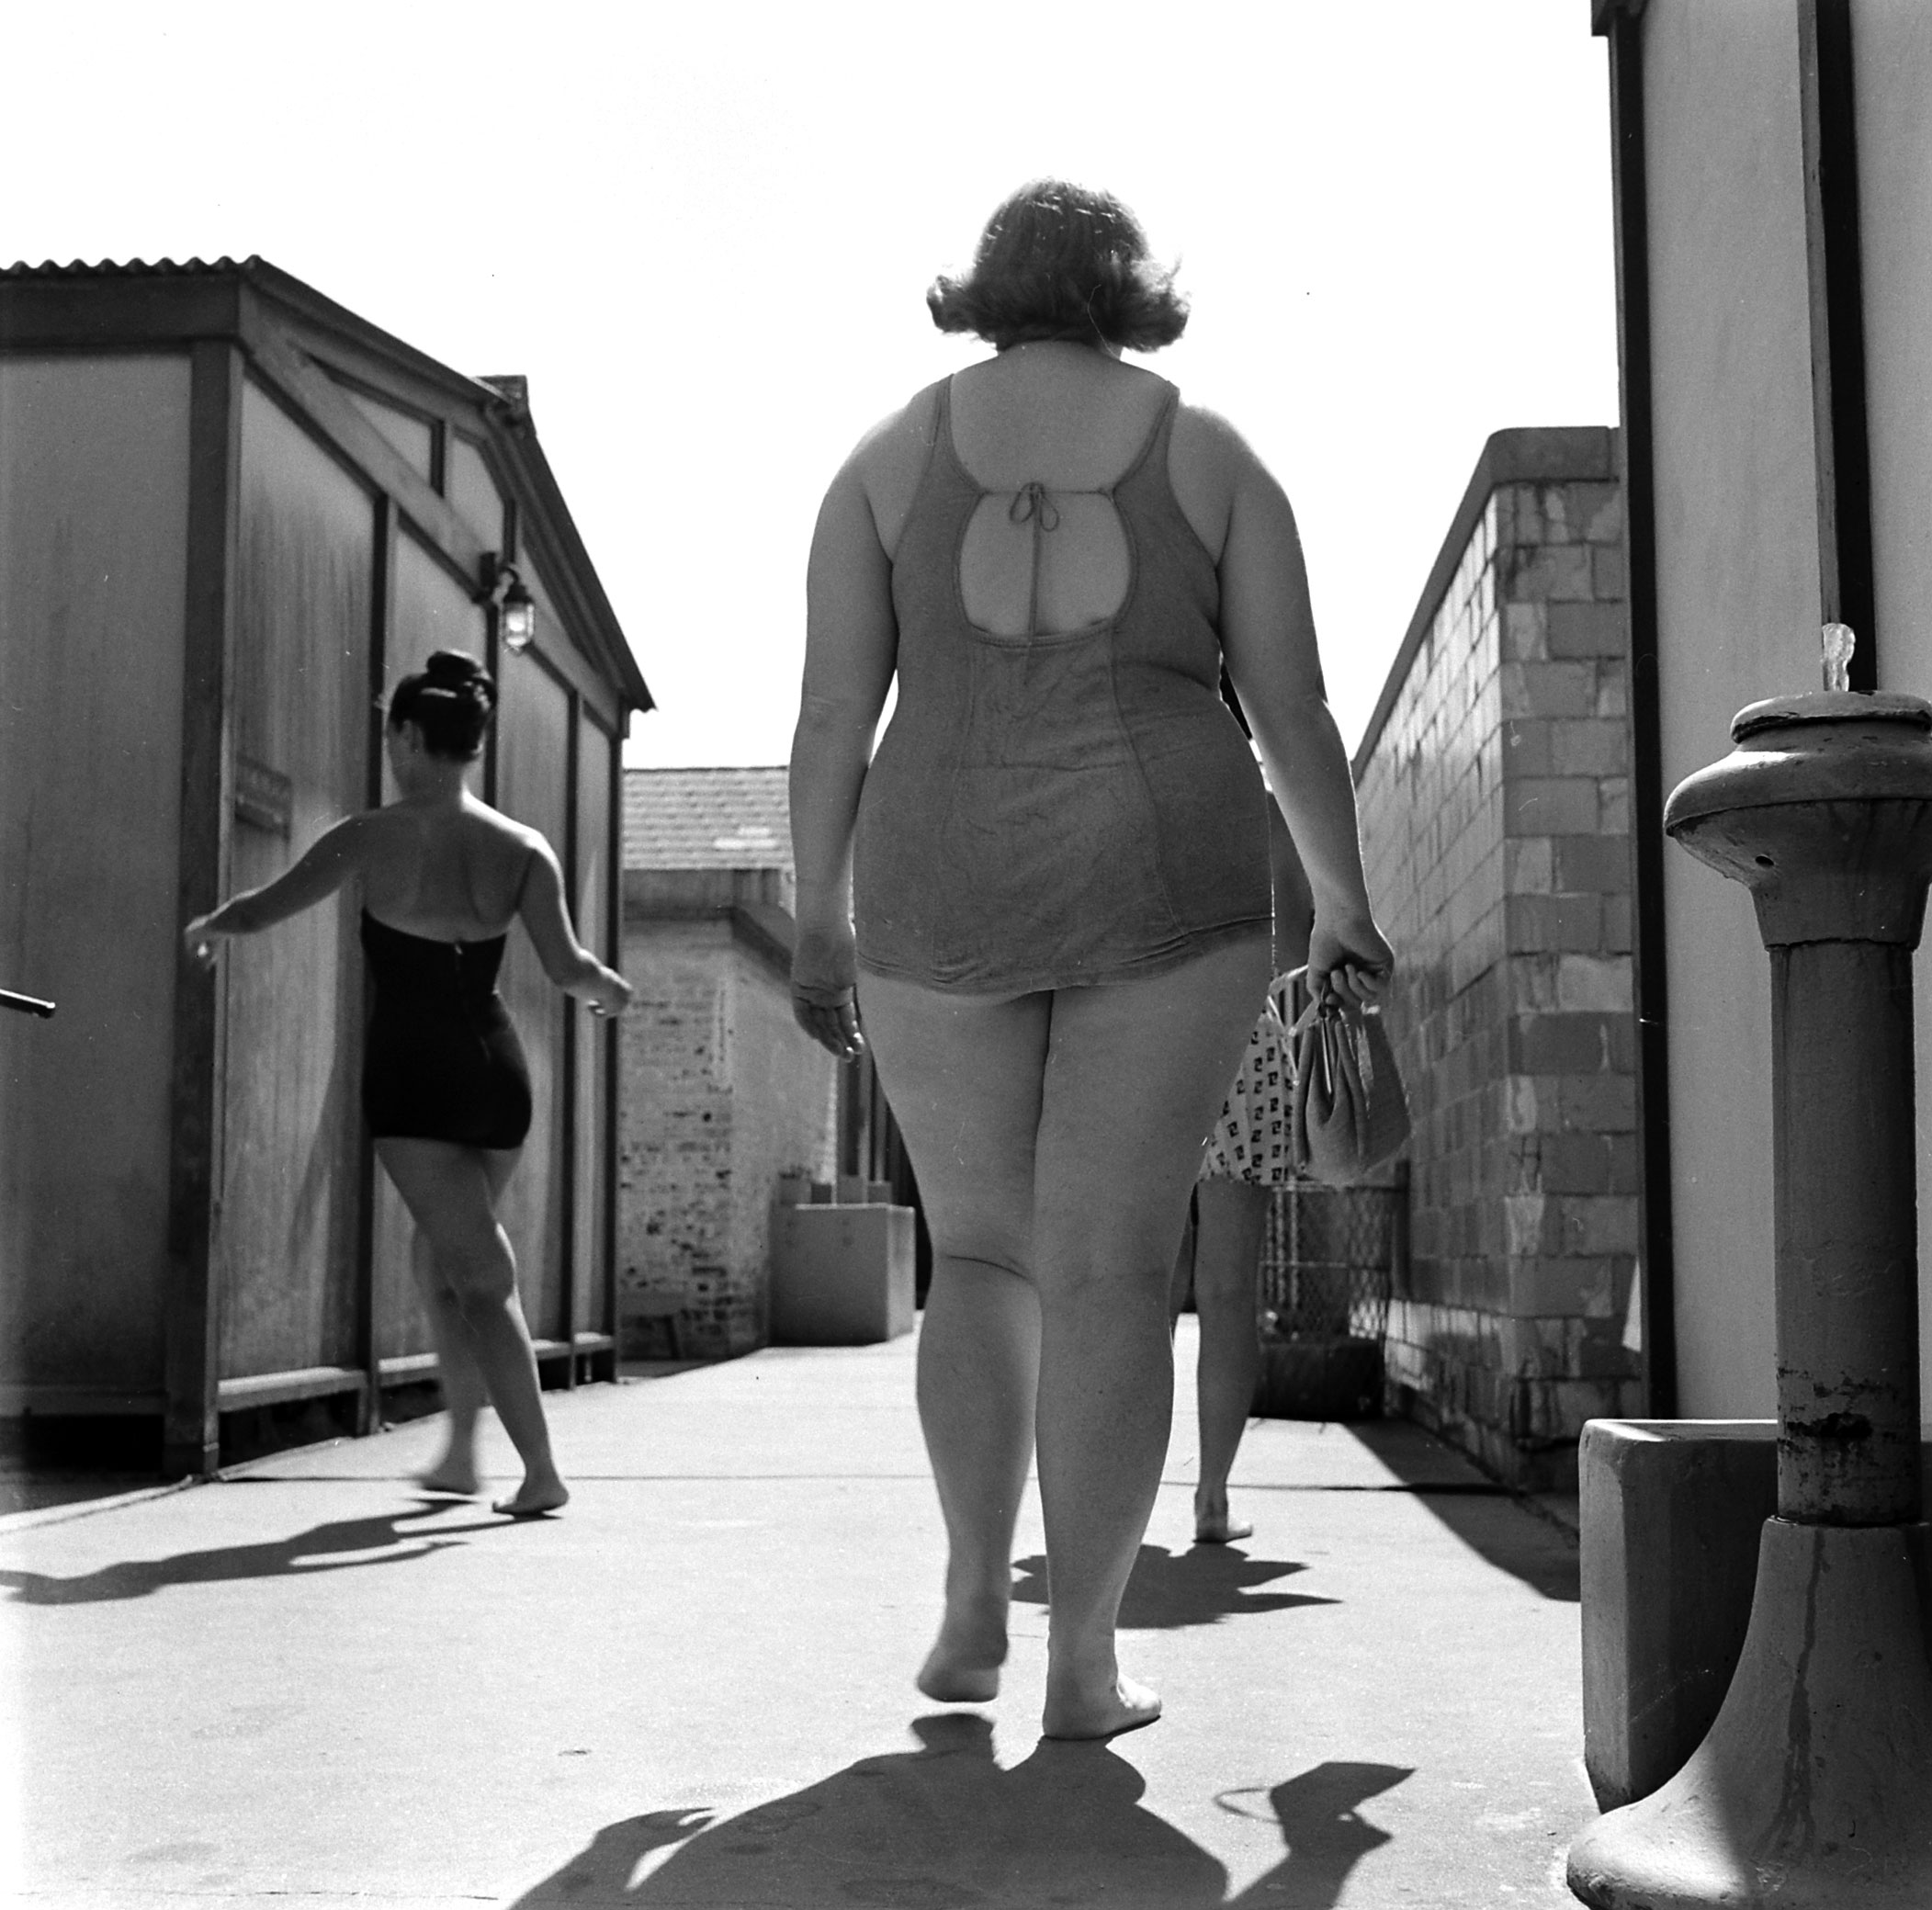 Bulging at beach in 1949, 197-pound Dorothy [Bradley] self-consciously leaves locker room for swim. She covered up embarrassment by being jolly and gregarious